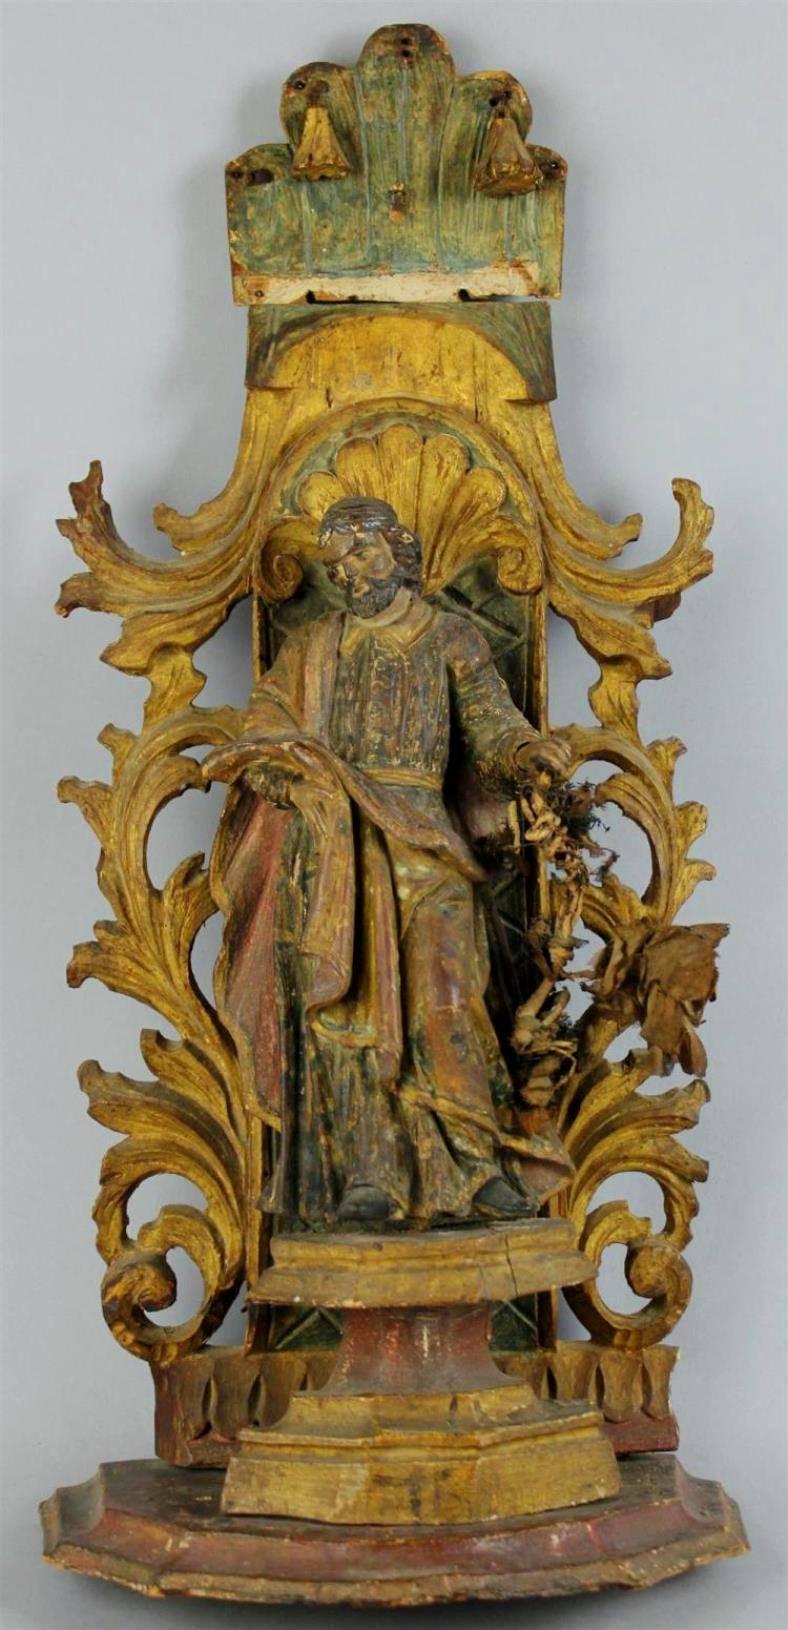 18th century Polychromed Statue of Saint Joseph - Sculpture by Unknown